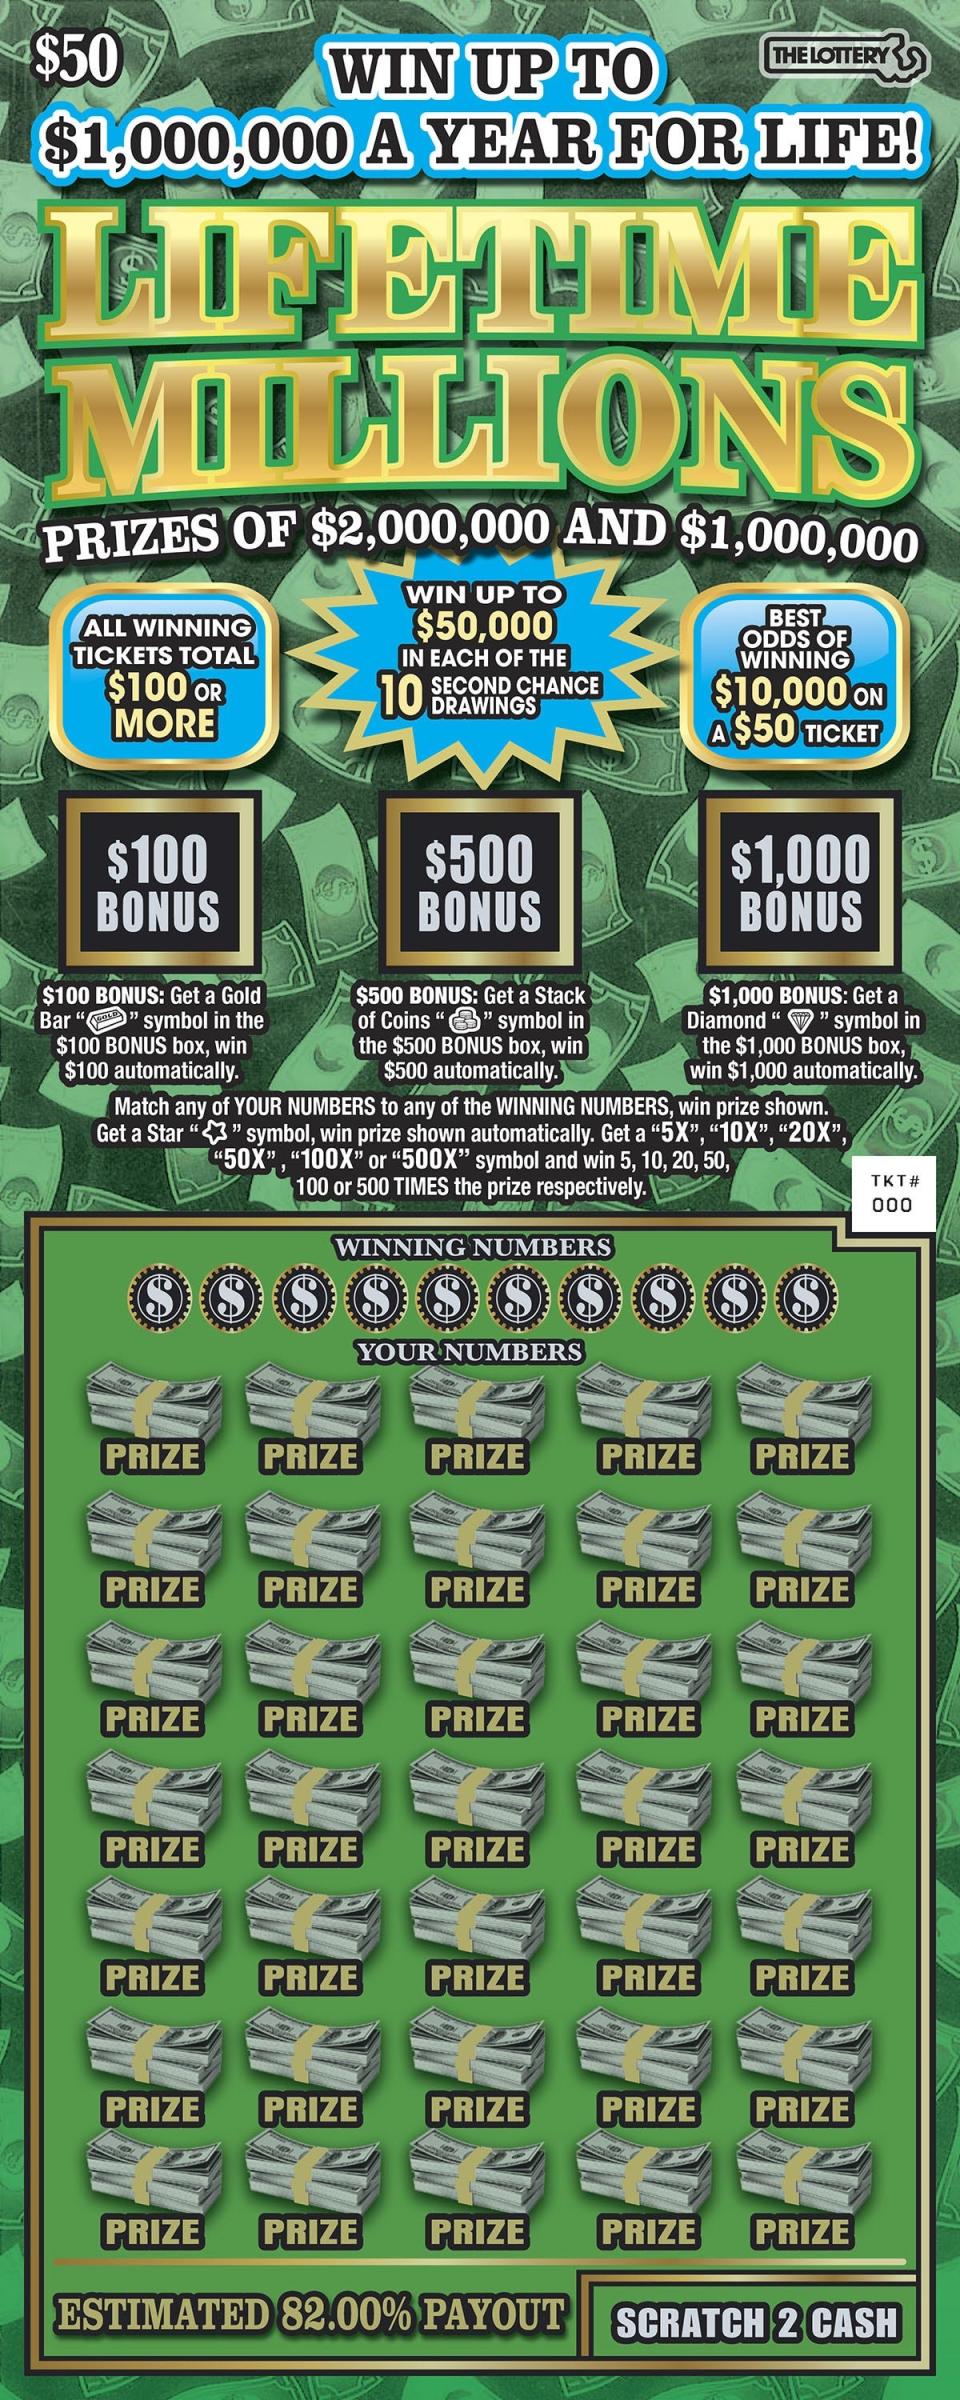 Massachusetts launched a new $50 scratch ticket, Lifetime Millions, on Feb. 6.